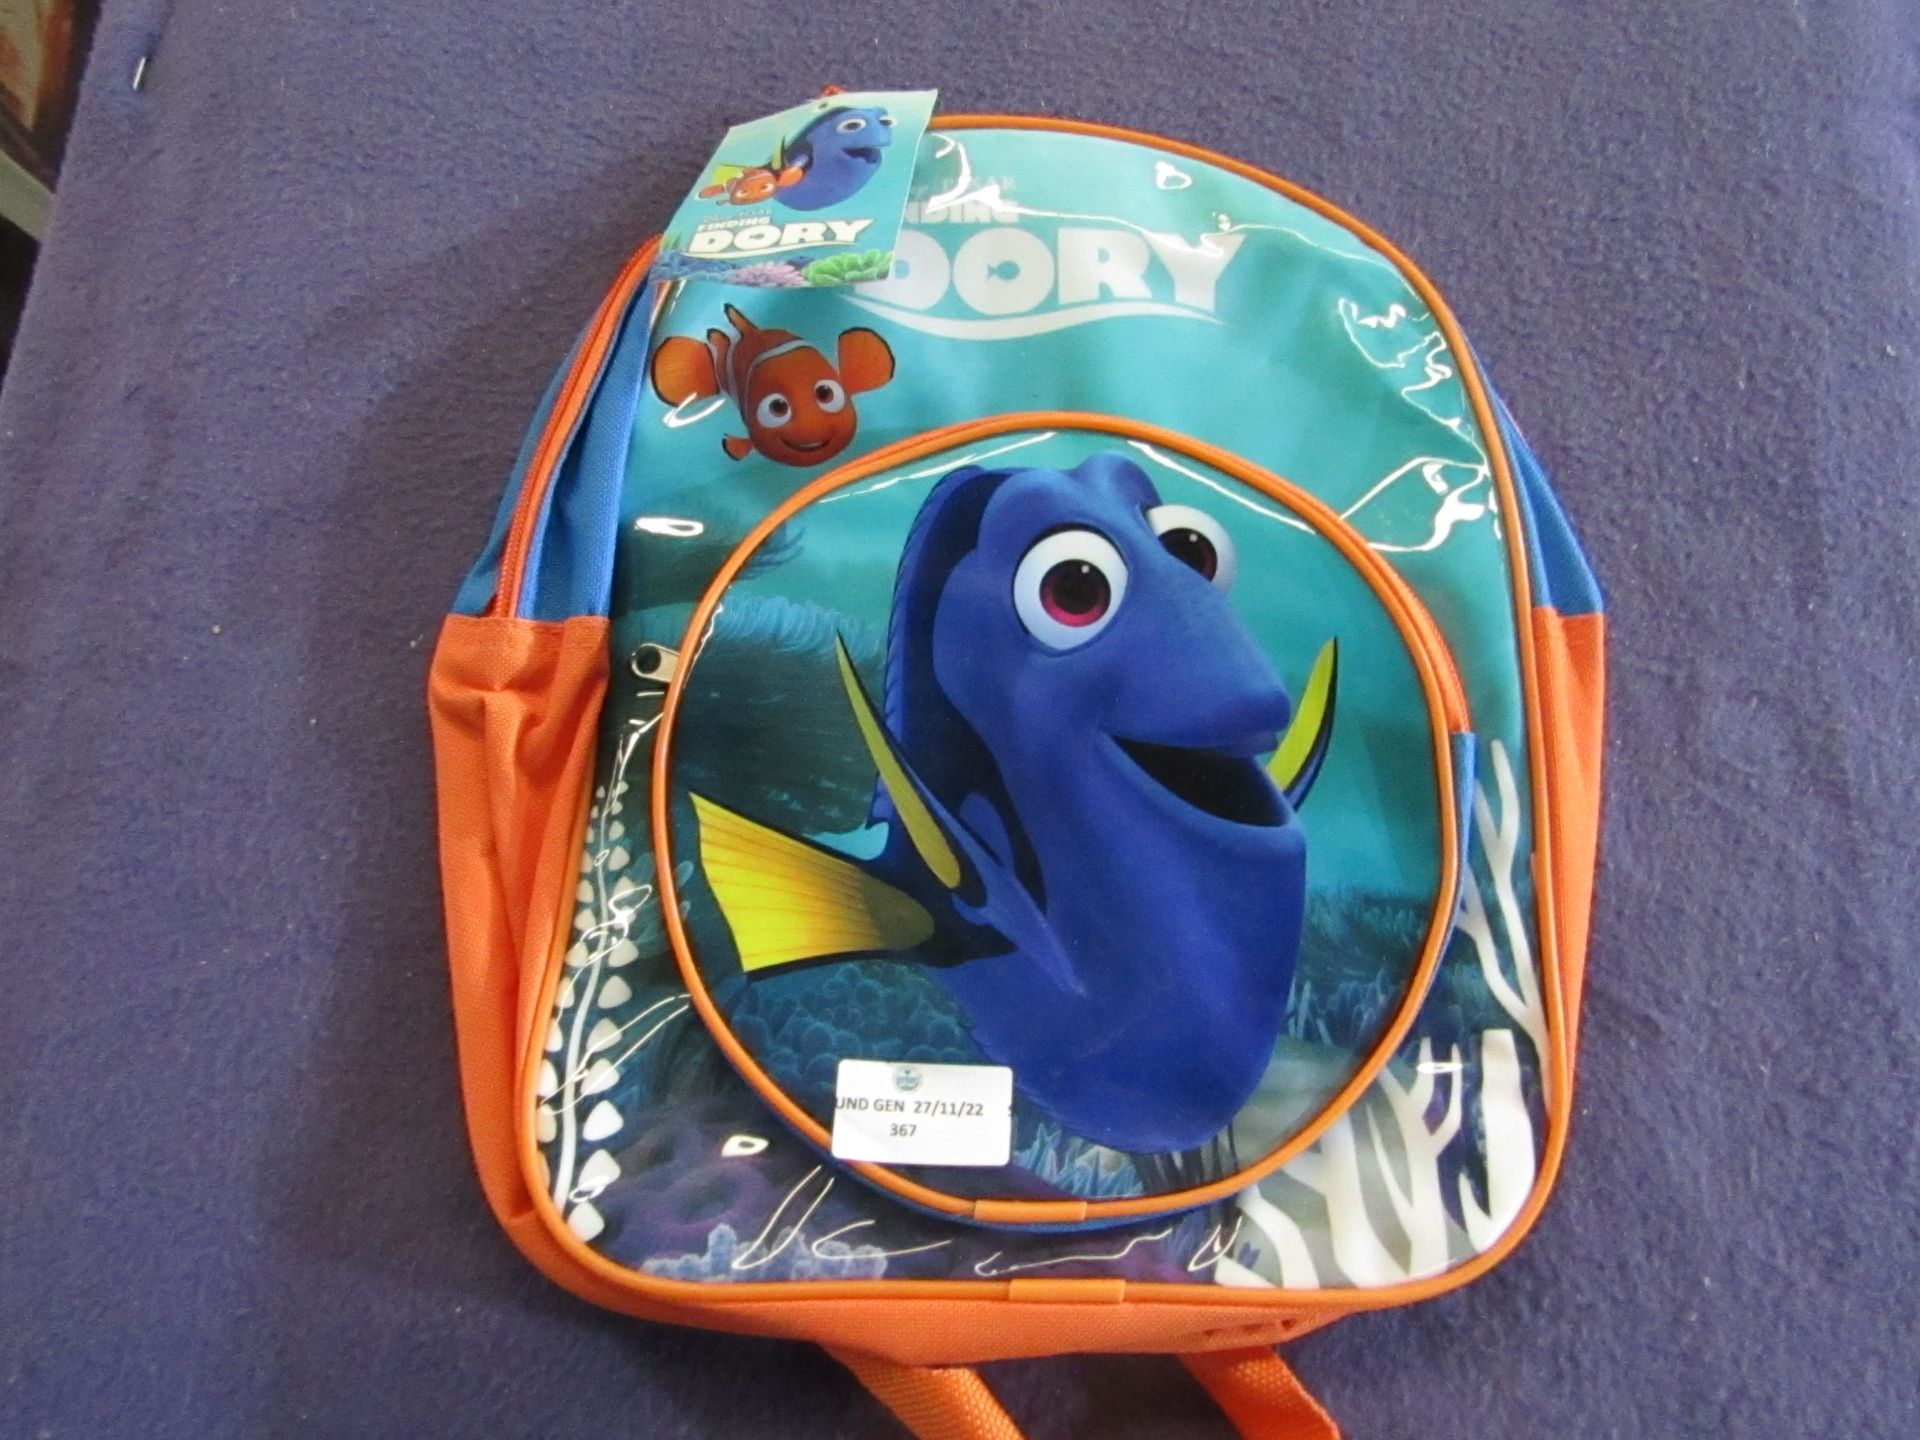 Finding Dory - Backpack - No Packaging, Original Tags.